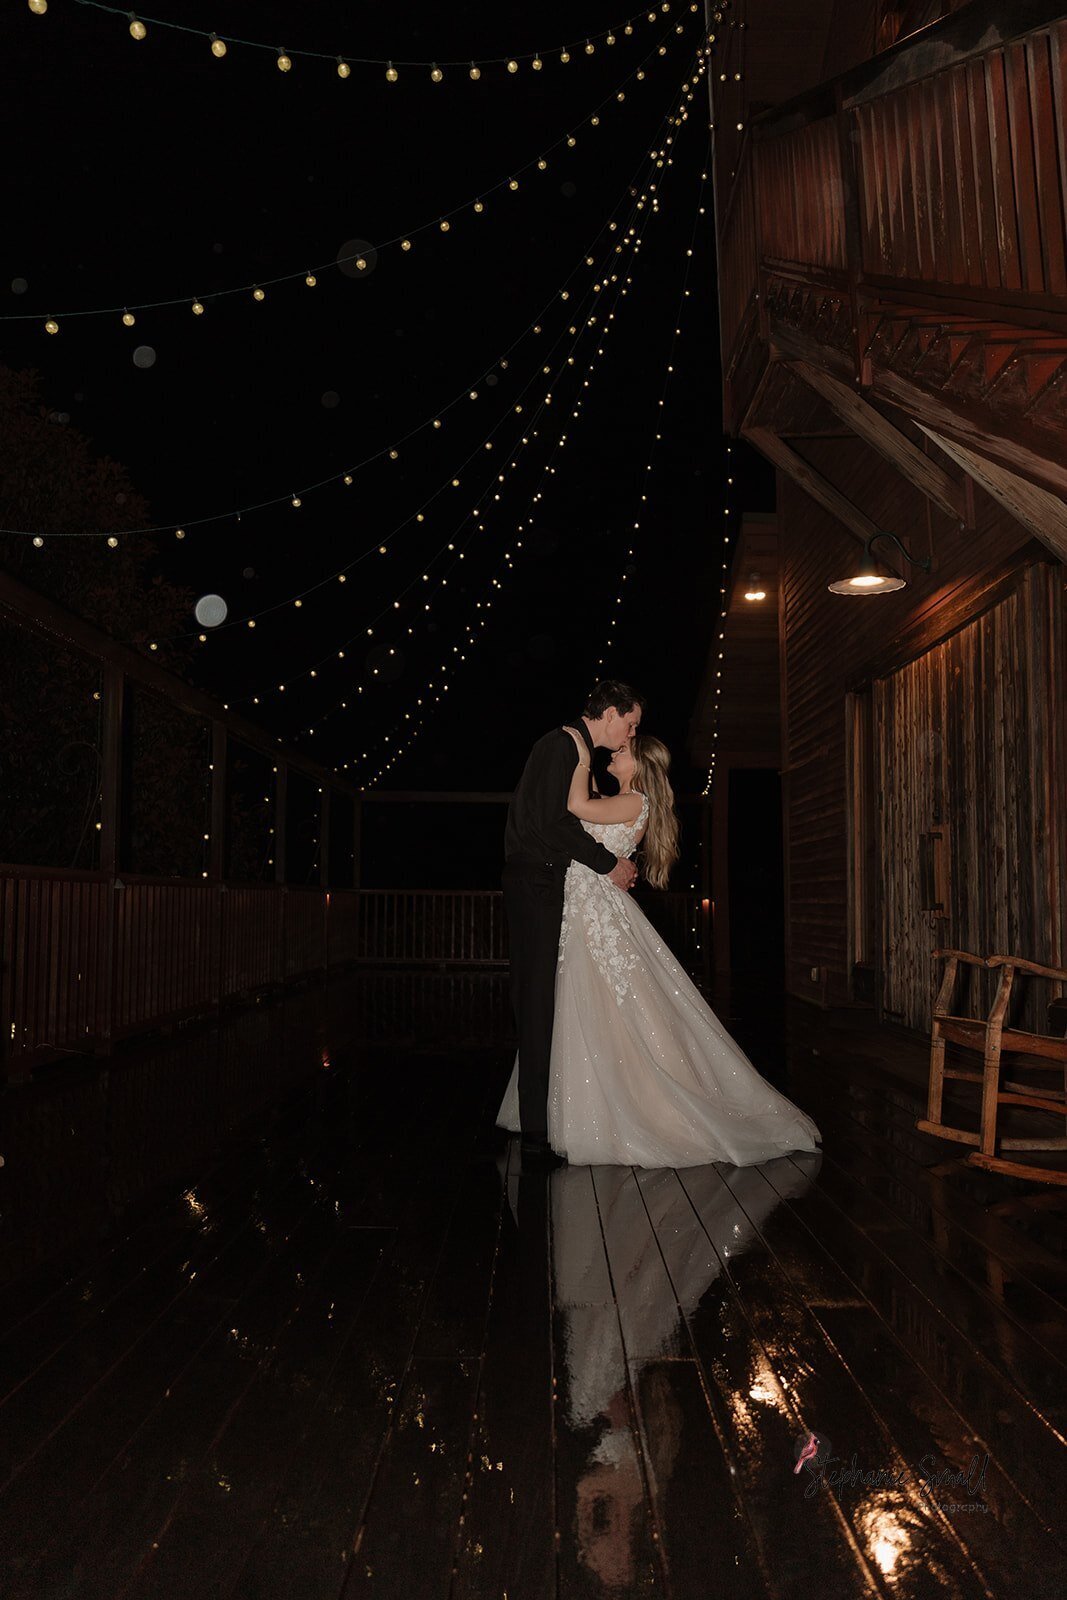 The Barn at Valhalla bride and groom dance